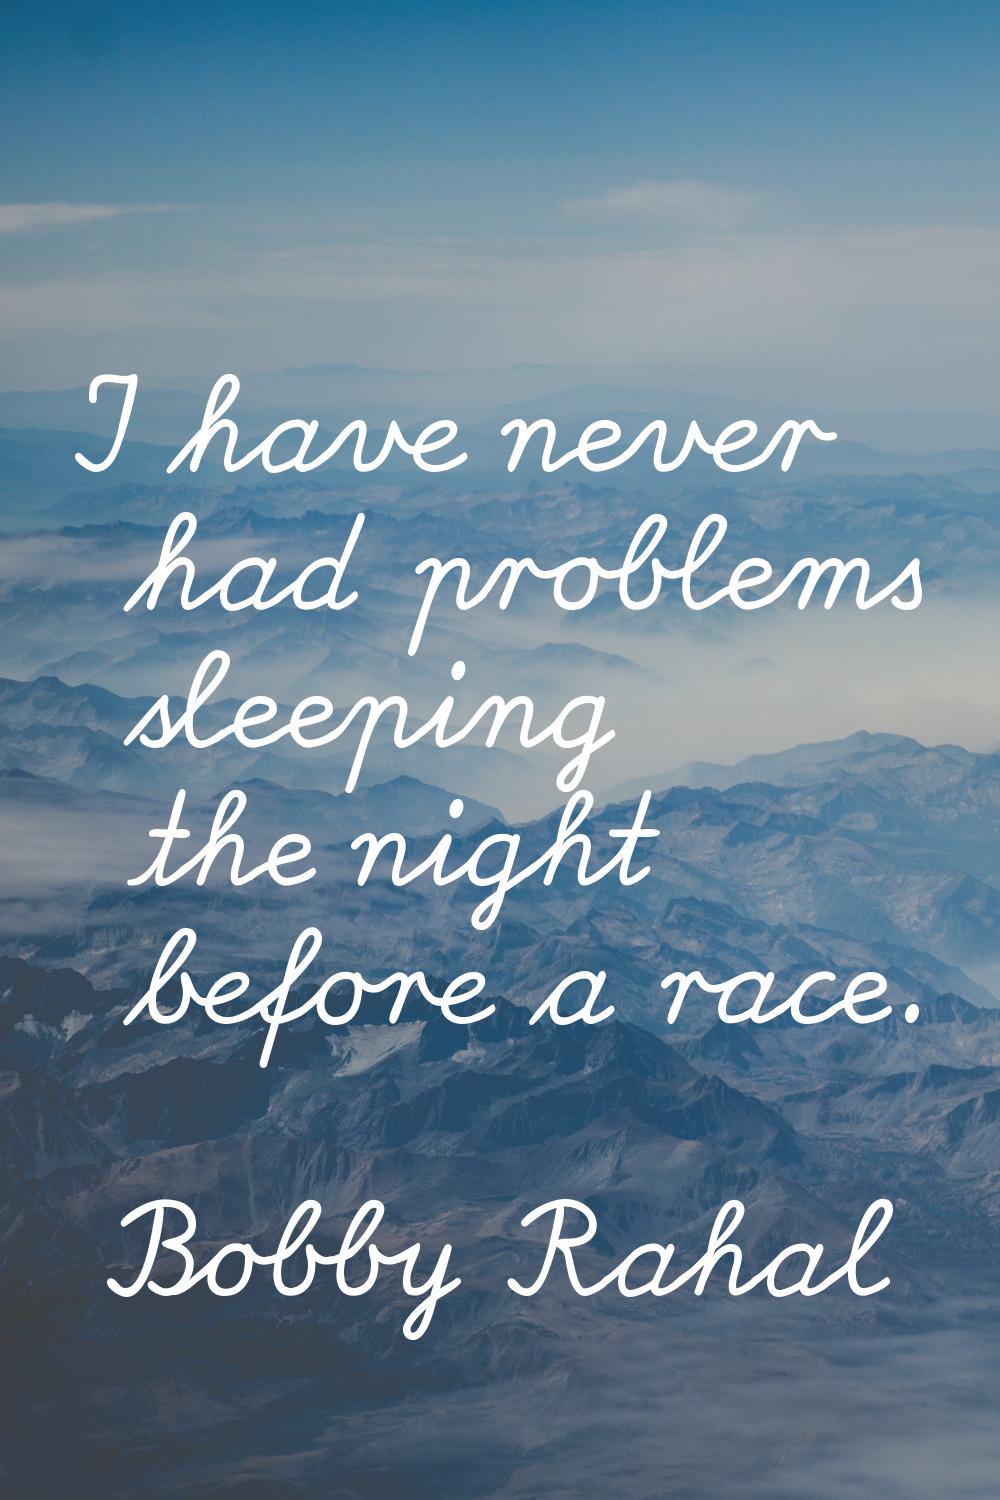 I have never had problems sleeping the night before a race.